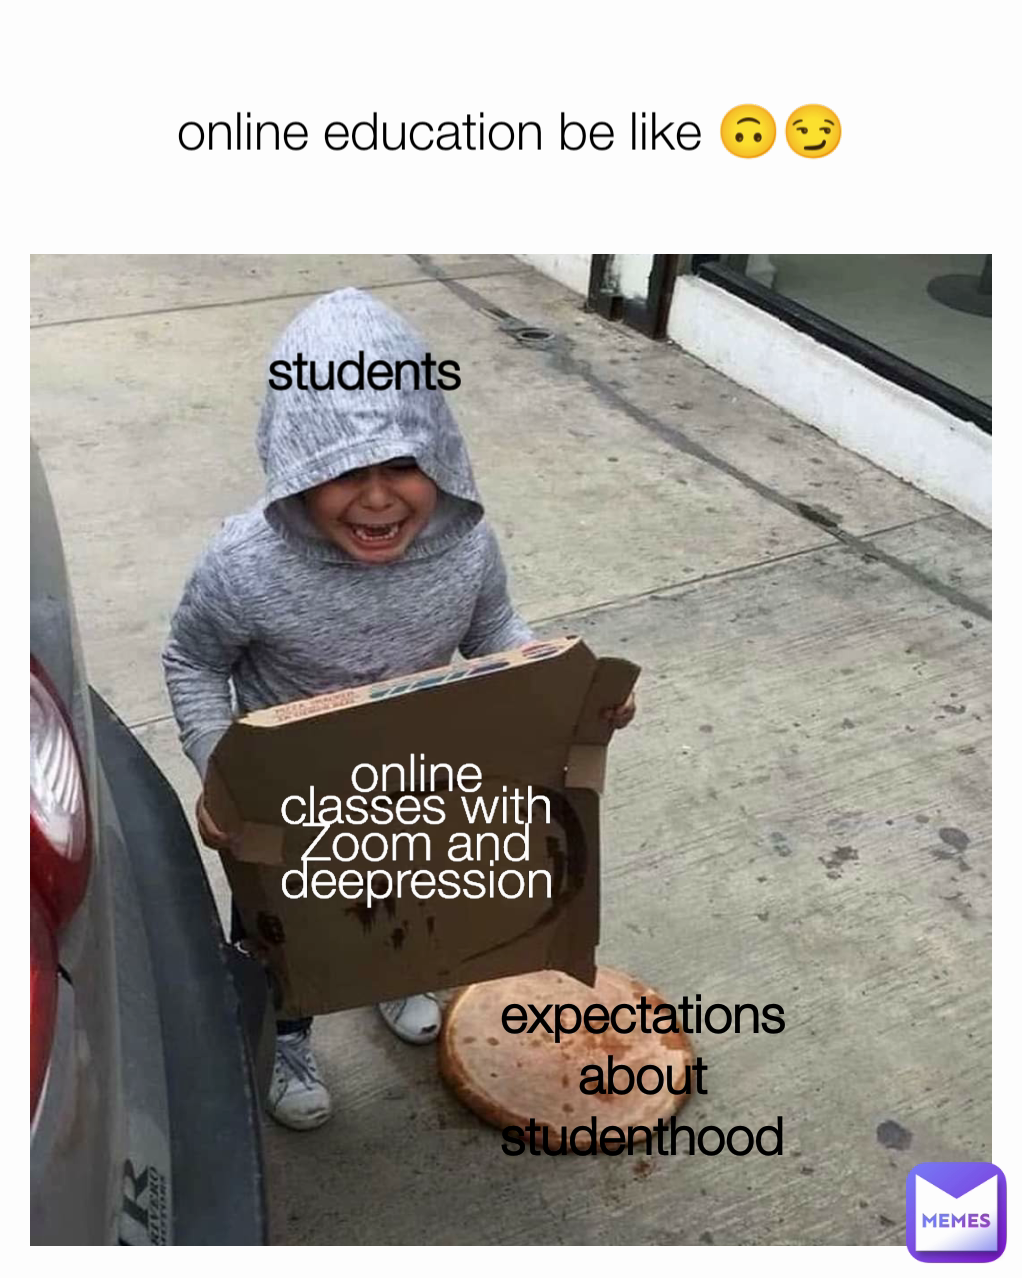 expectations about studenthood online education be like 🙃😏 students online classes with Zoom and deepression